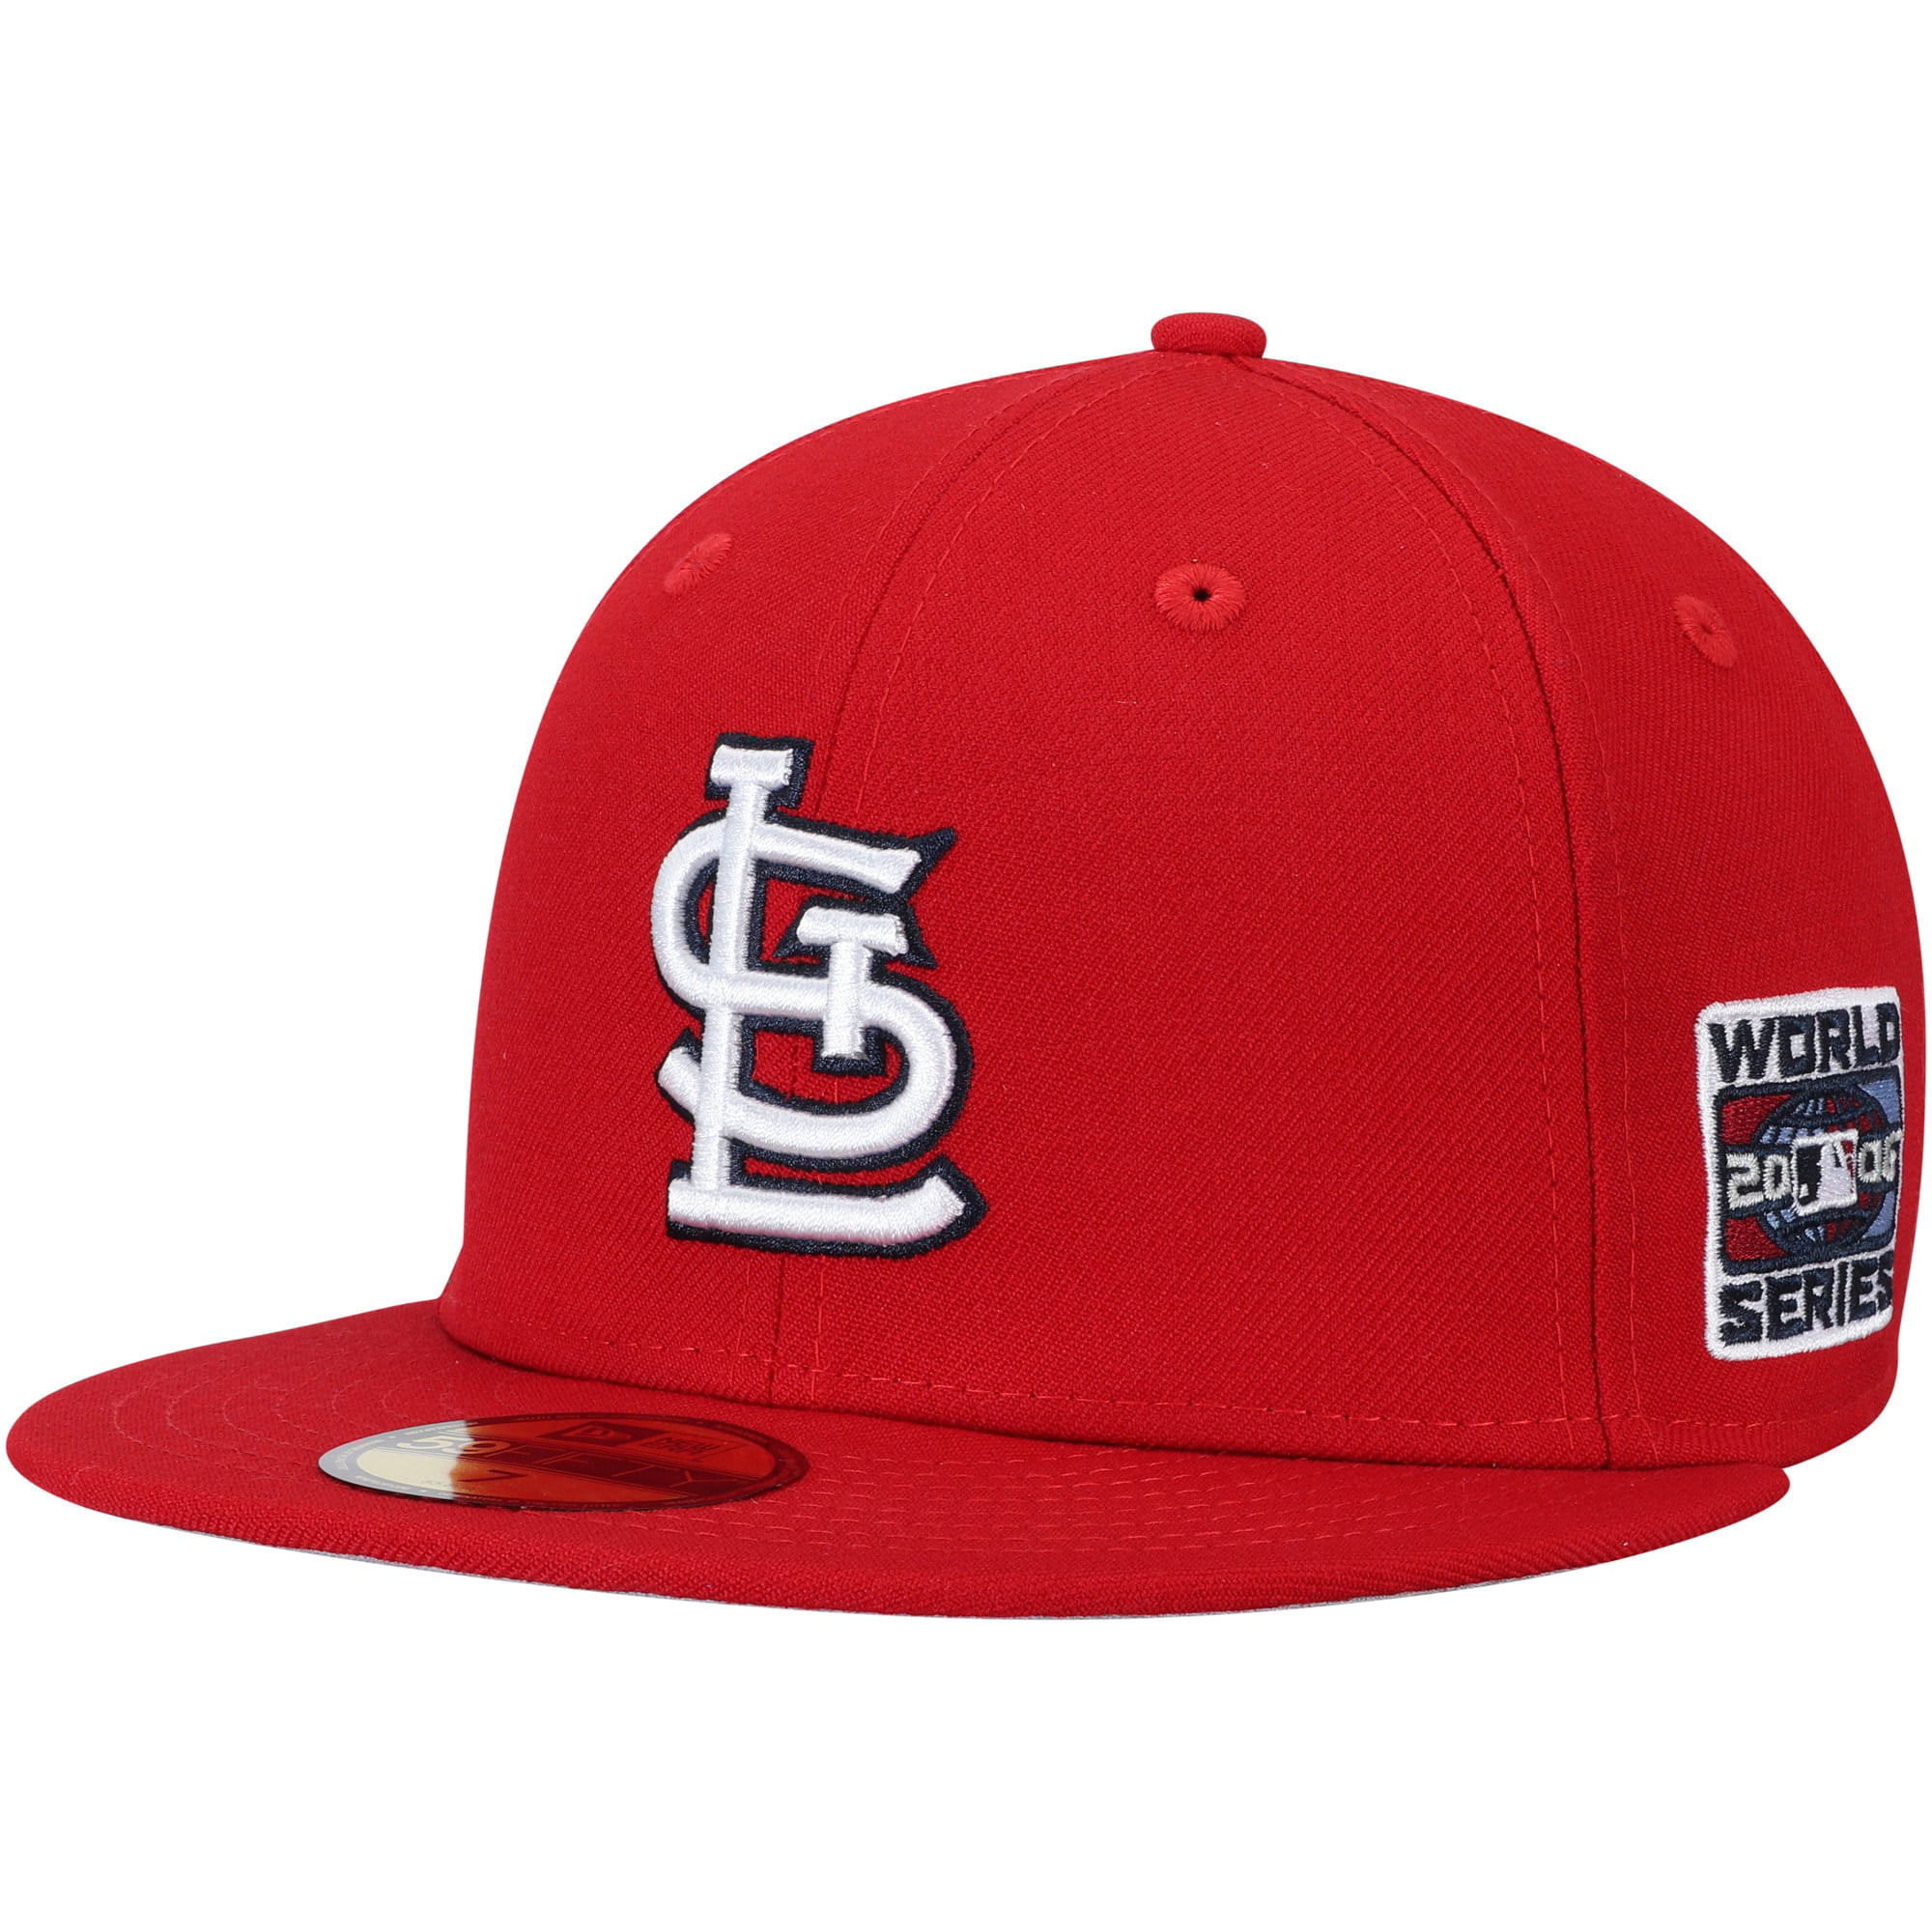 St Louis Cardinals Team Store Locations | IQS Executive